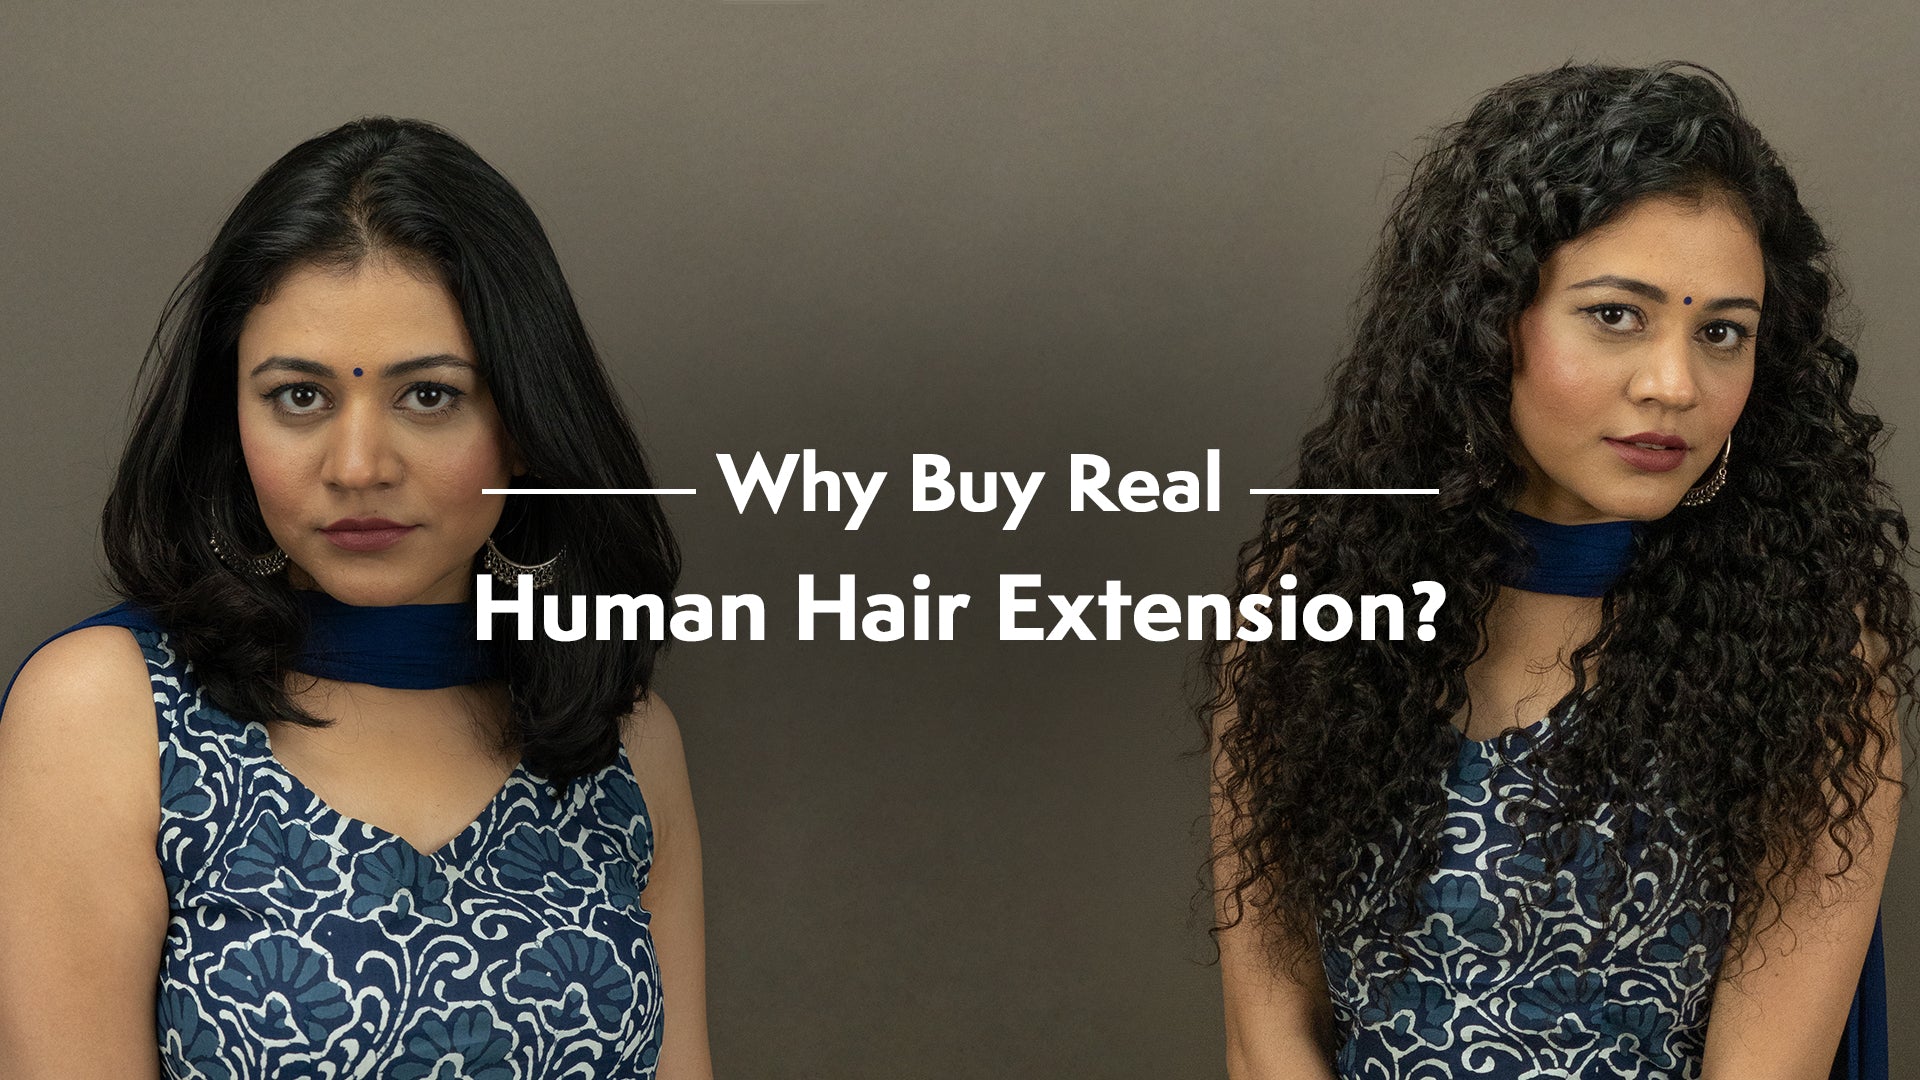 Why buy real human hair extensions?